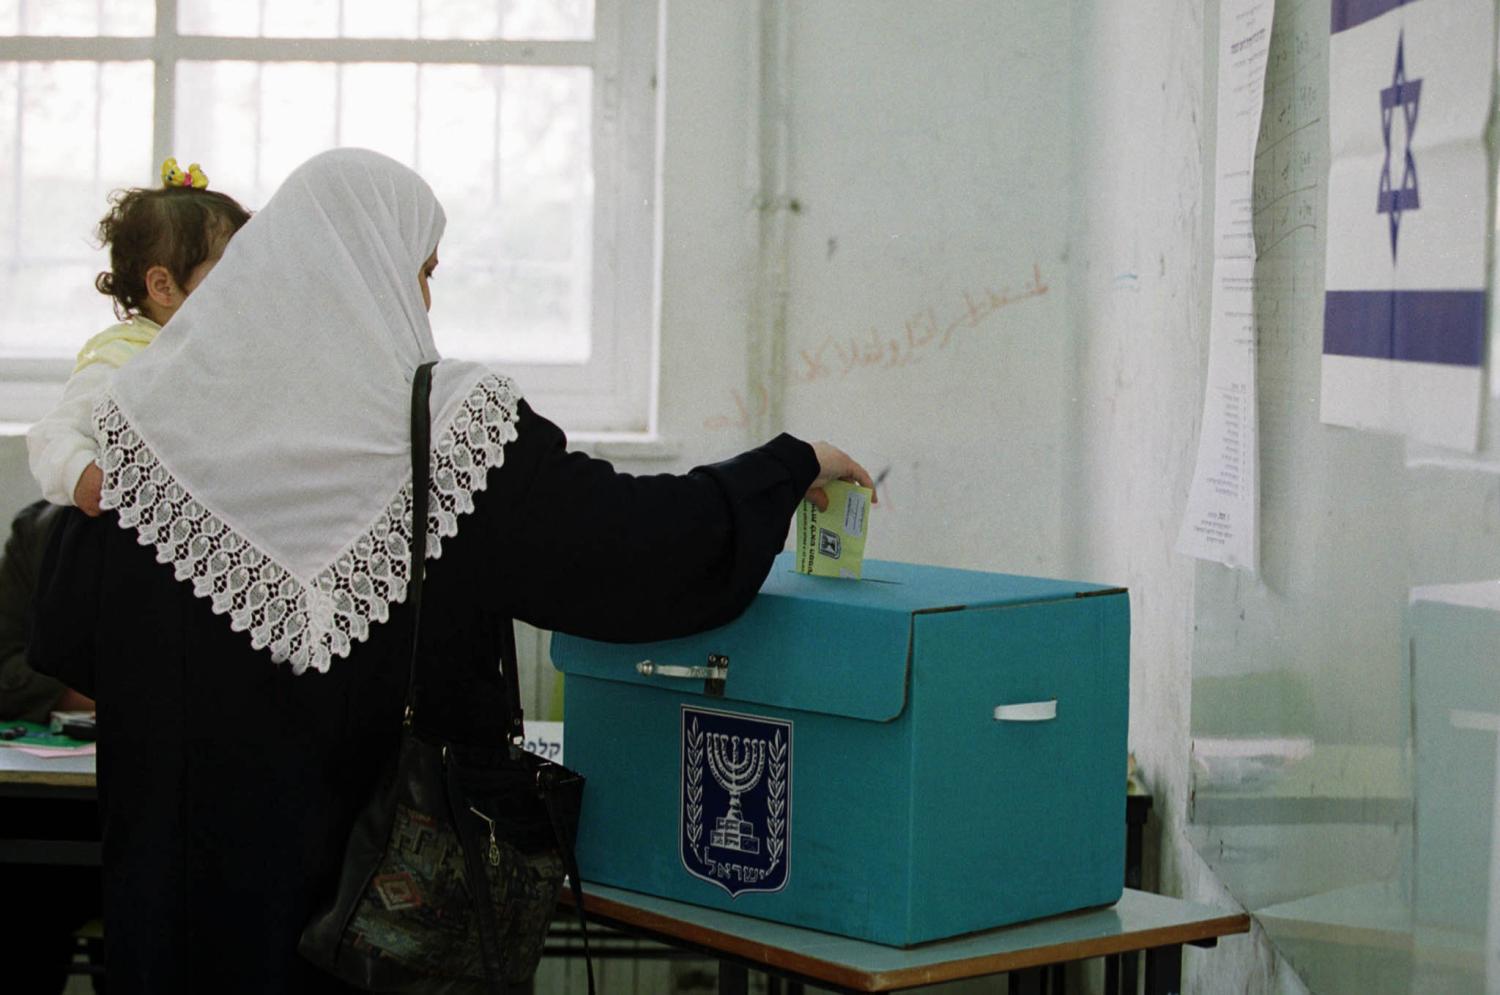 An Israeli-Arab voter drops a ballot into a ballot box during voting in East Jerusalem, February 6, 2001. Most Israeli-Arabs are expected to abstain from voting in a protest against the 13 Israeli-Arabs who were killed during the recent 'Intifada' or uprising against Israel. Ariel Sharon appeared poised for a stunning political victory over Prime Minister Ehud Barak as voters began casting ballots Tuesday in an election seen as a referendum on Israel's relationship with the Palestinians.EH/WS - RP2DRIGVXBAA